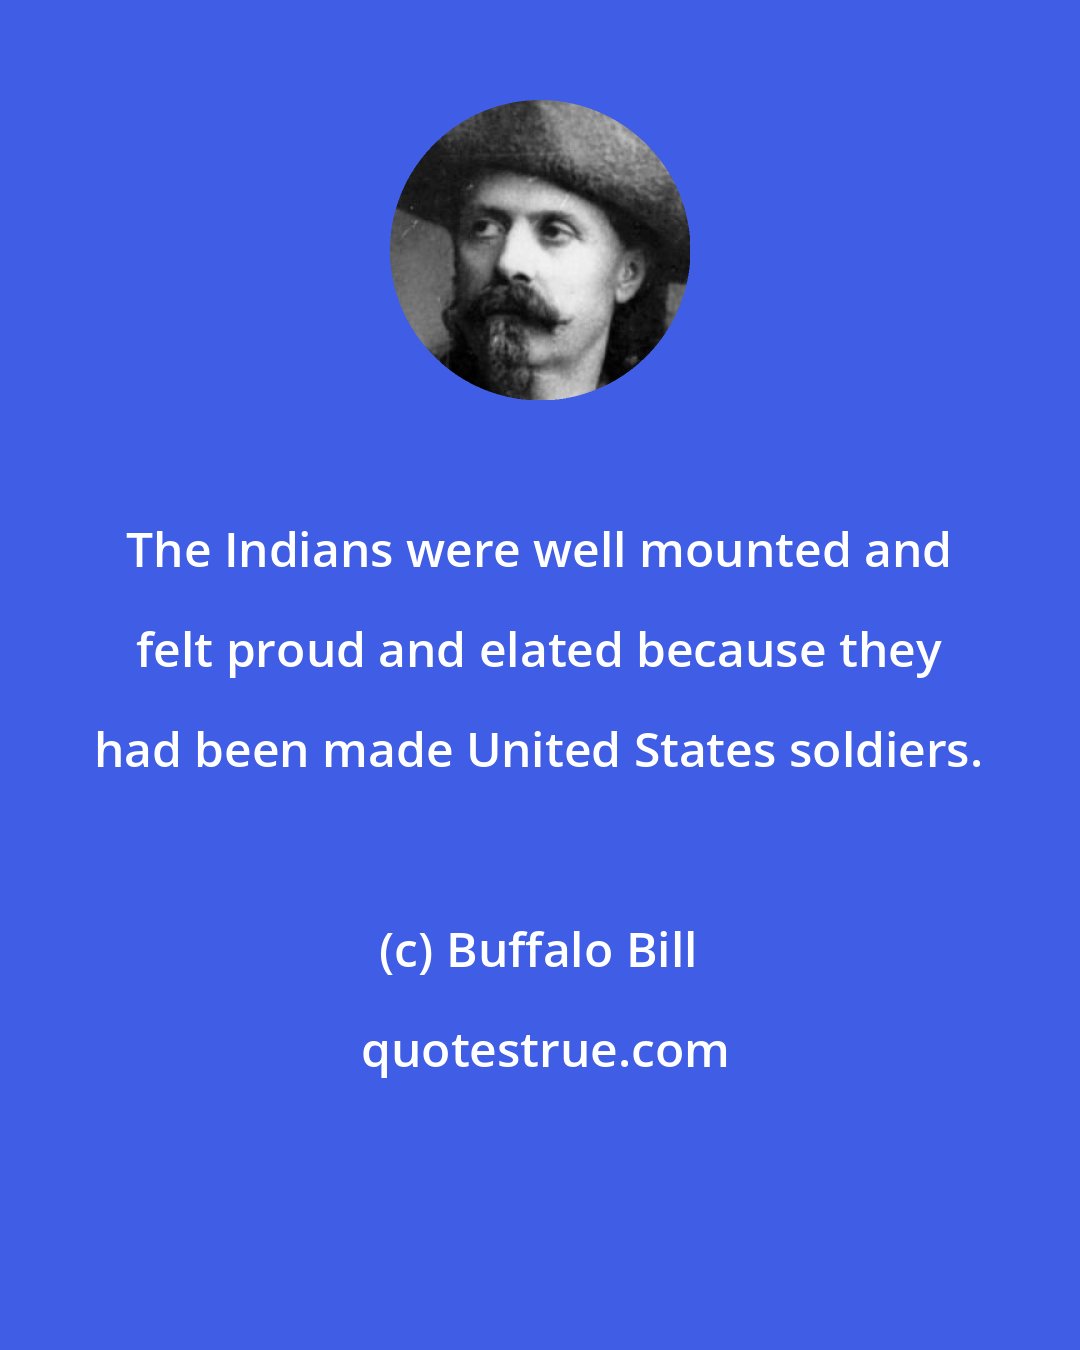 Buffalo Bill: The Indians were well mounted and felt proud and elated because they had been made United States soldiers.